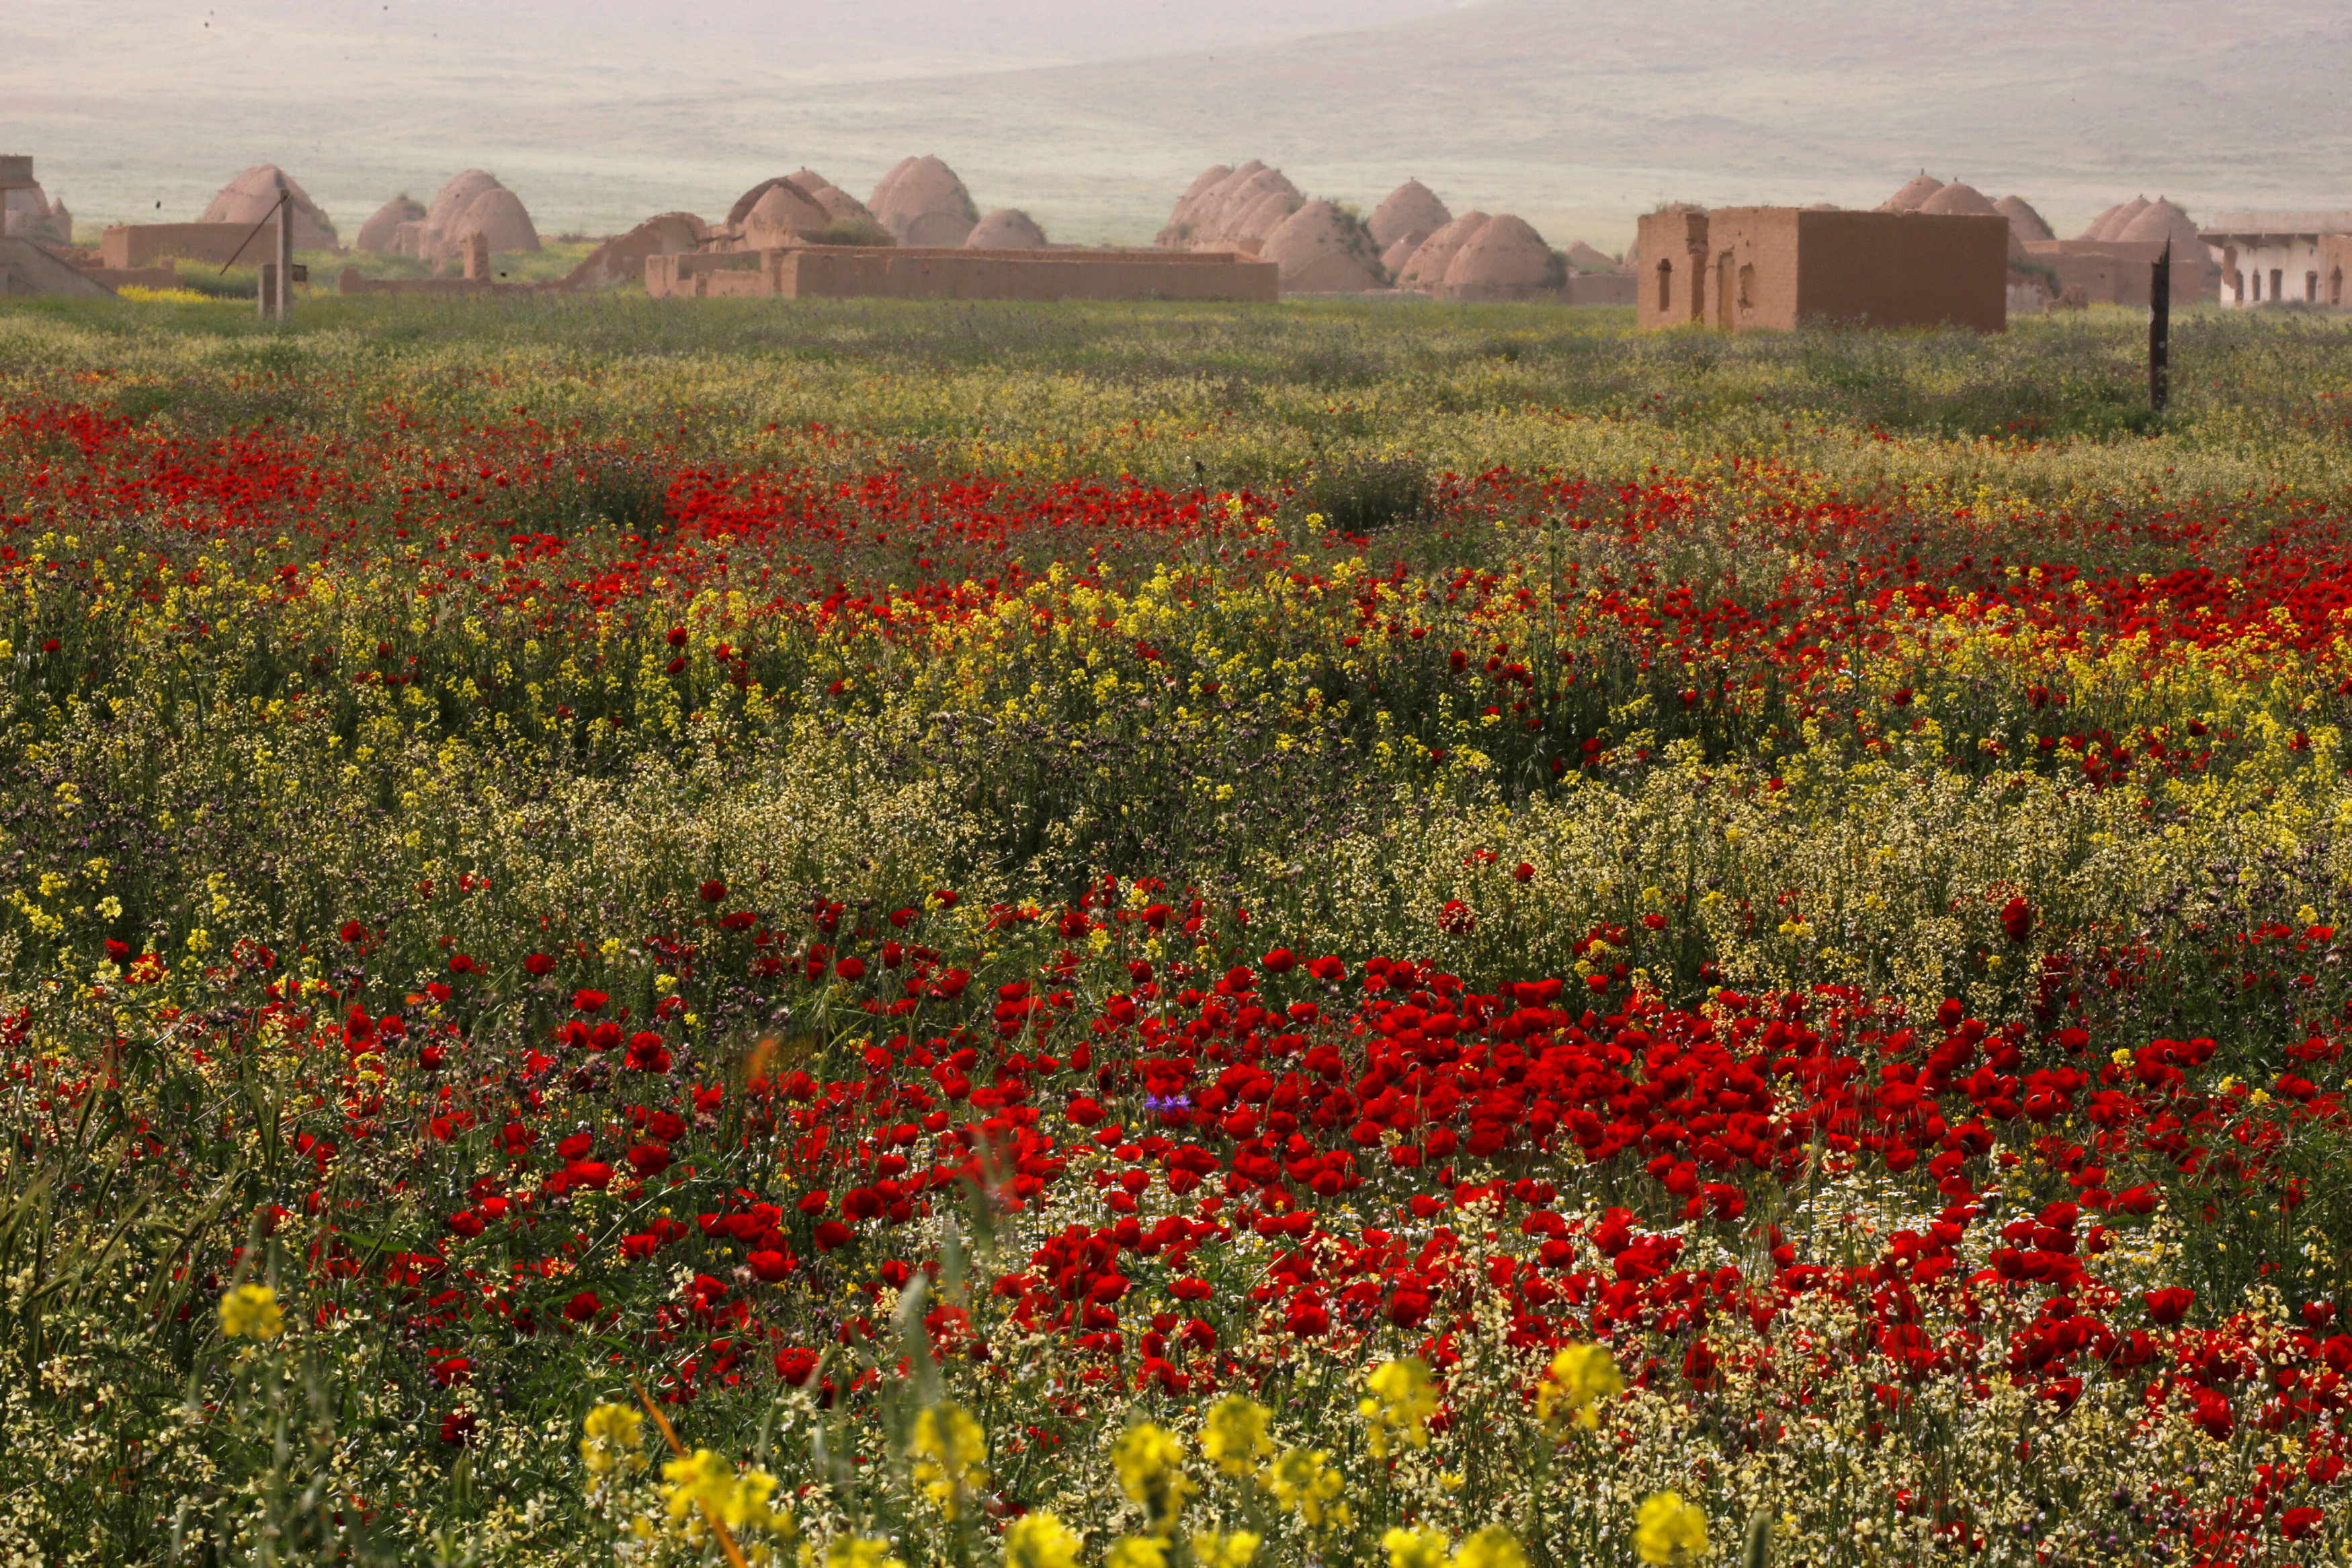 Poppies are seen in full bloom during spring in Aleppo governorate